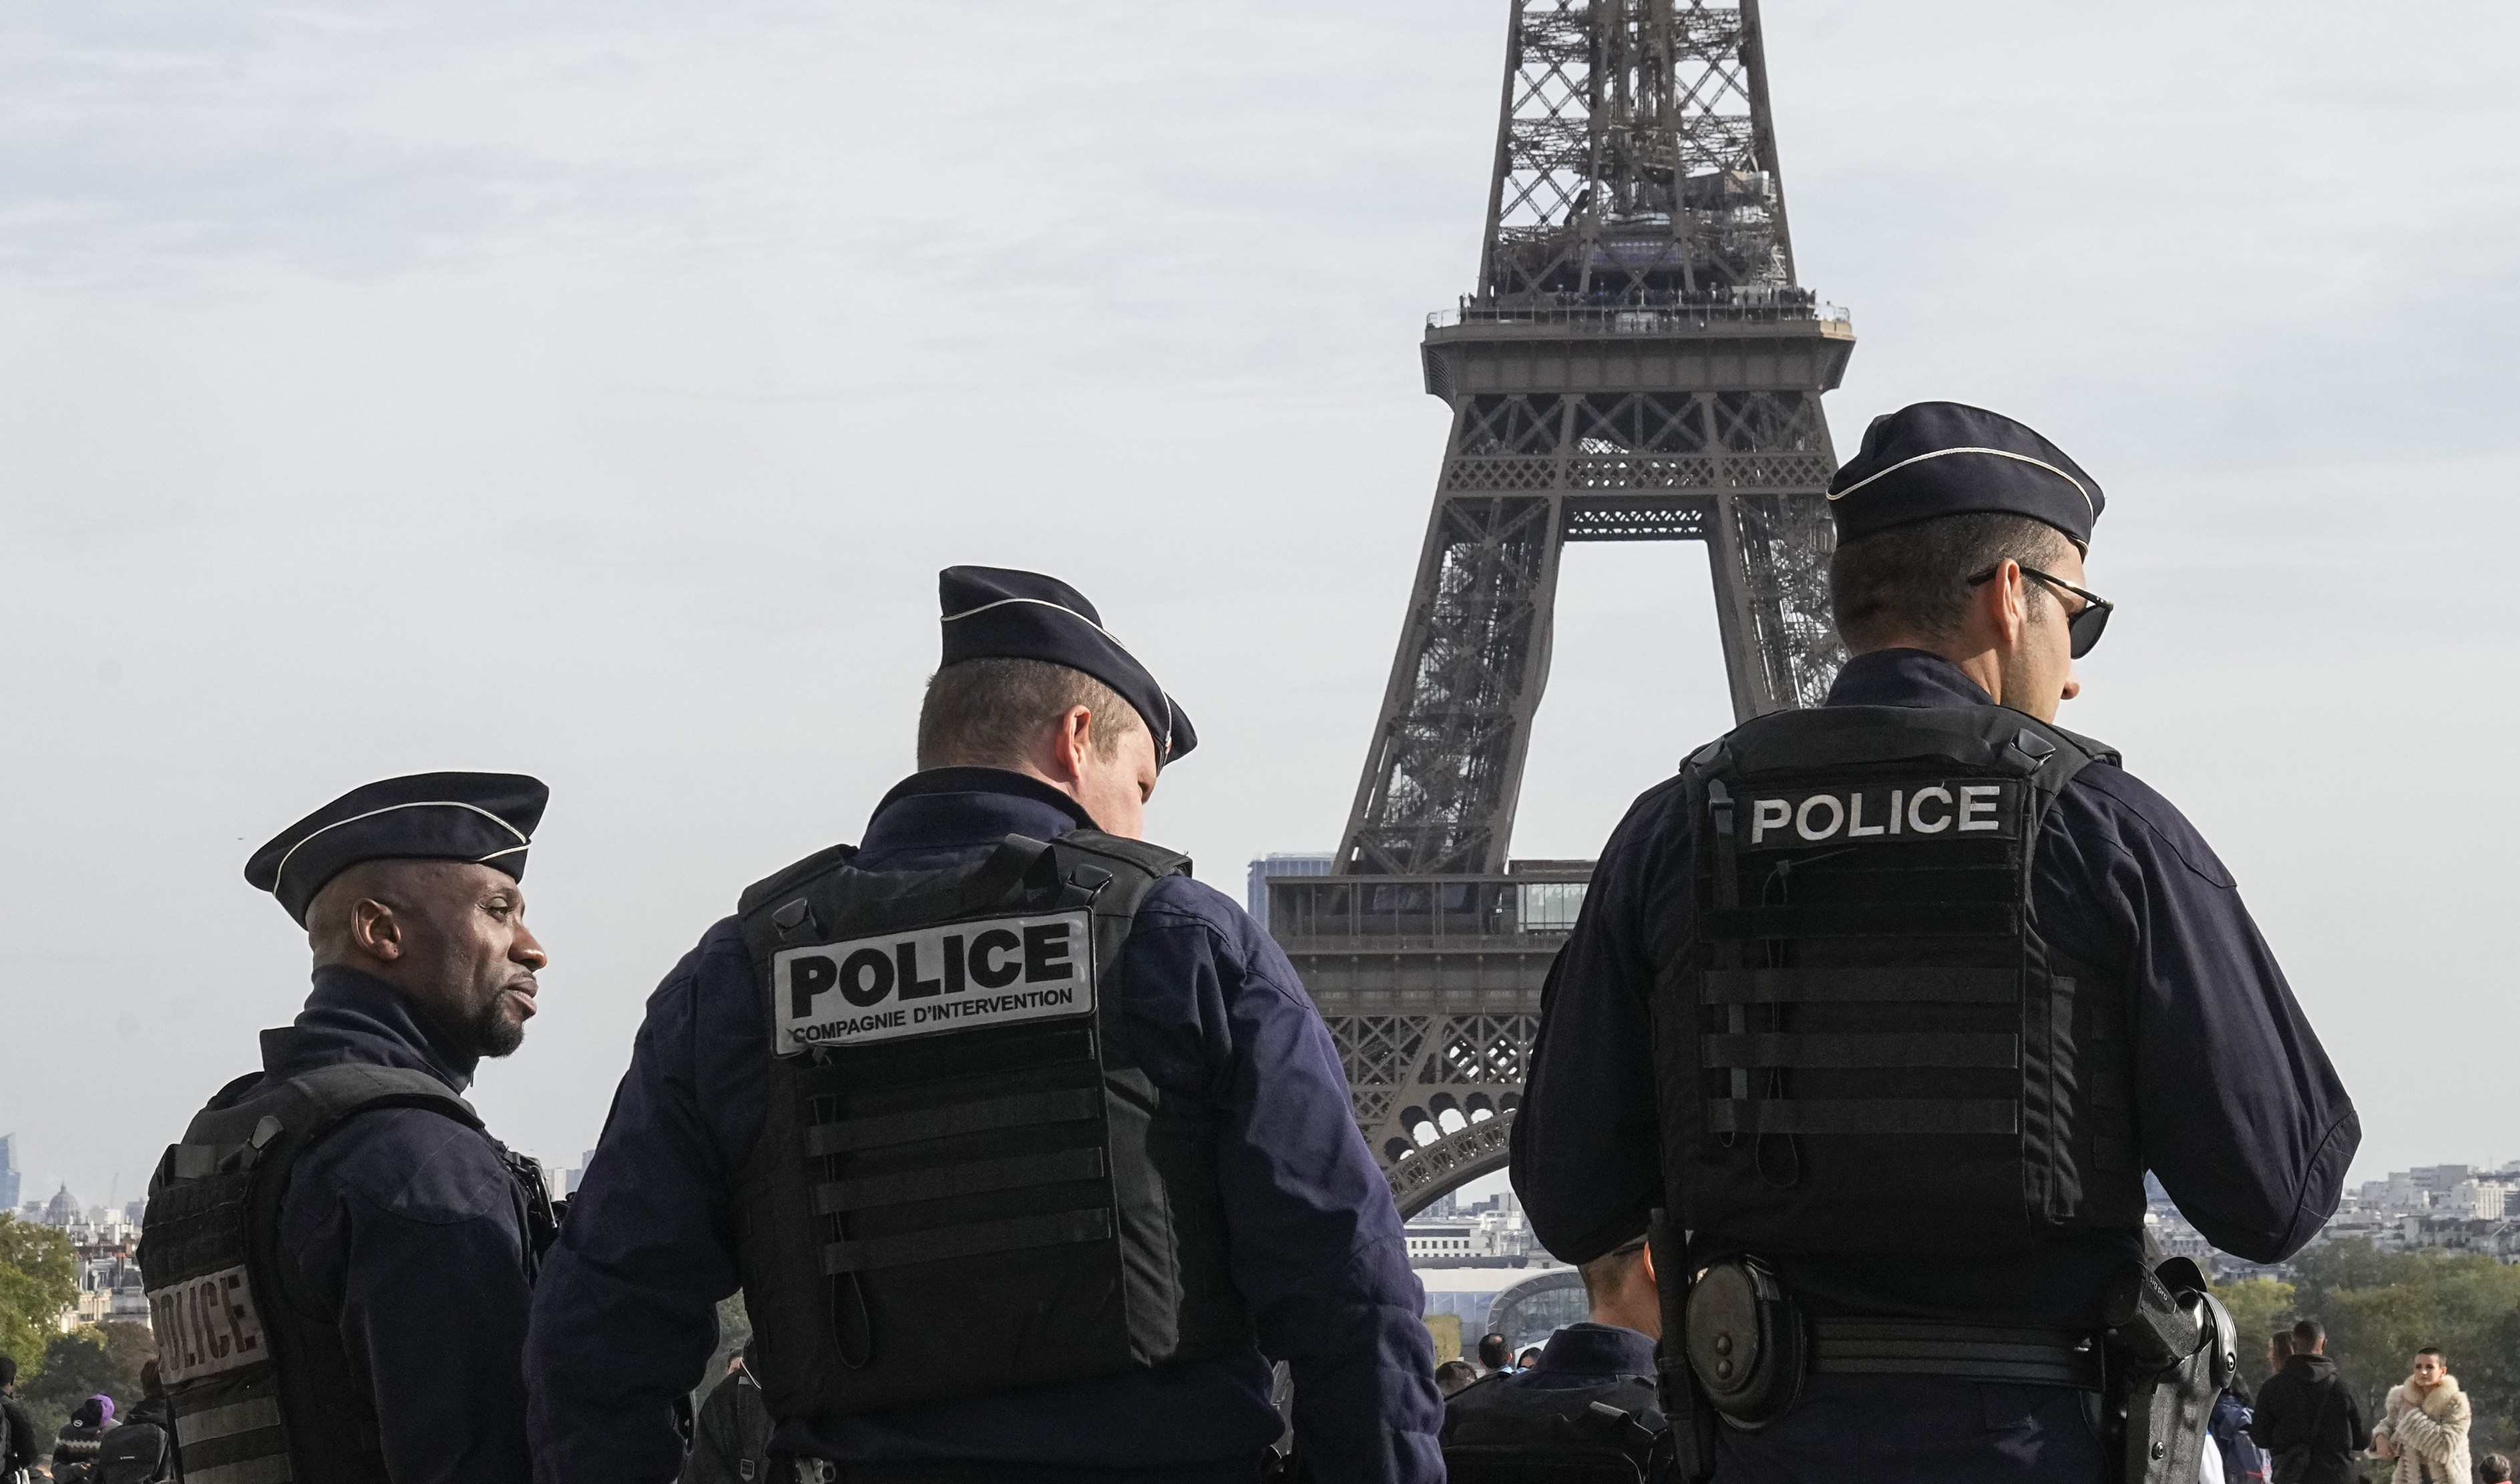 Police officers patrol the Trocadero plaza near the Eiffel Tower in Paris amid a rash of false alarms that forced the evacuation of 15 airports and the cancellation of 130 flights. Photo: AP